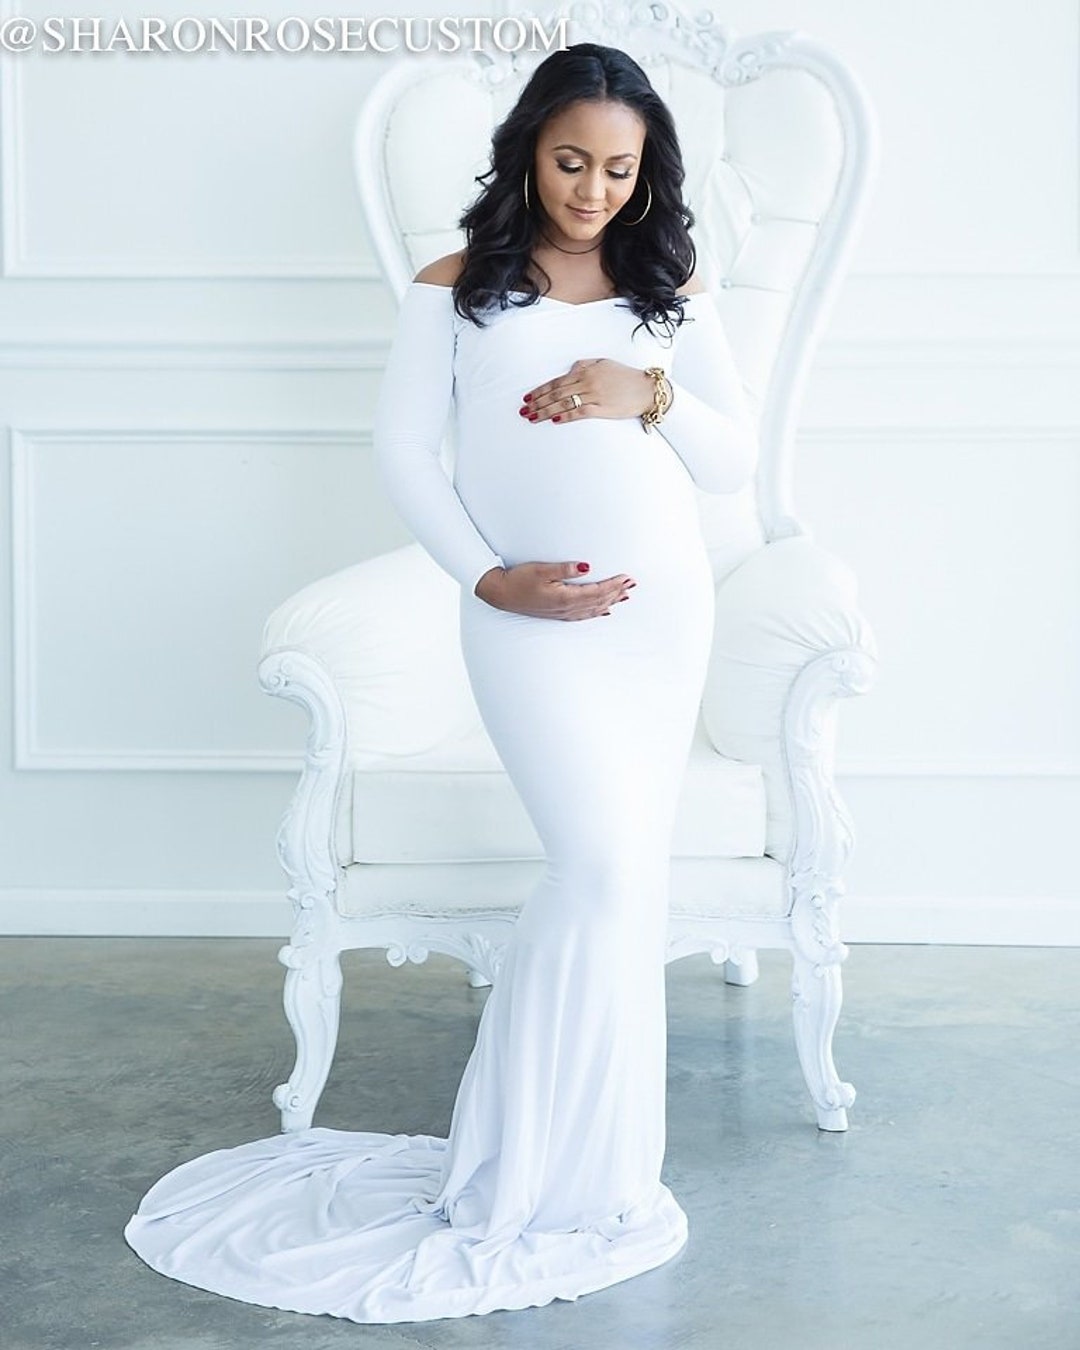 Hamilton Maternity Photographer | White Orchid Phoography